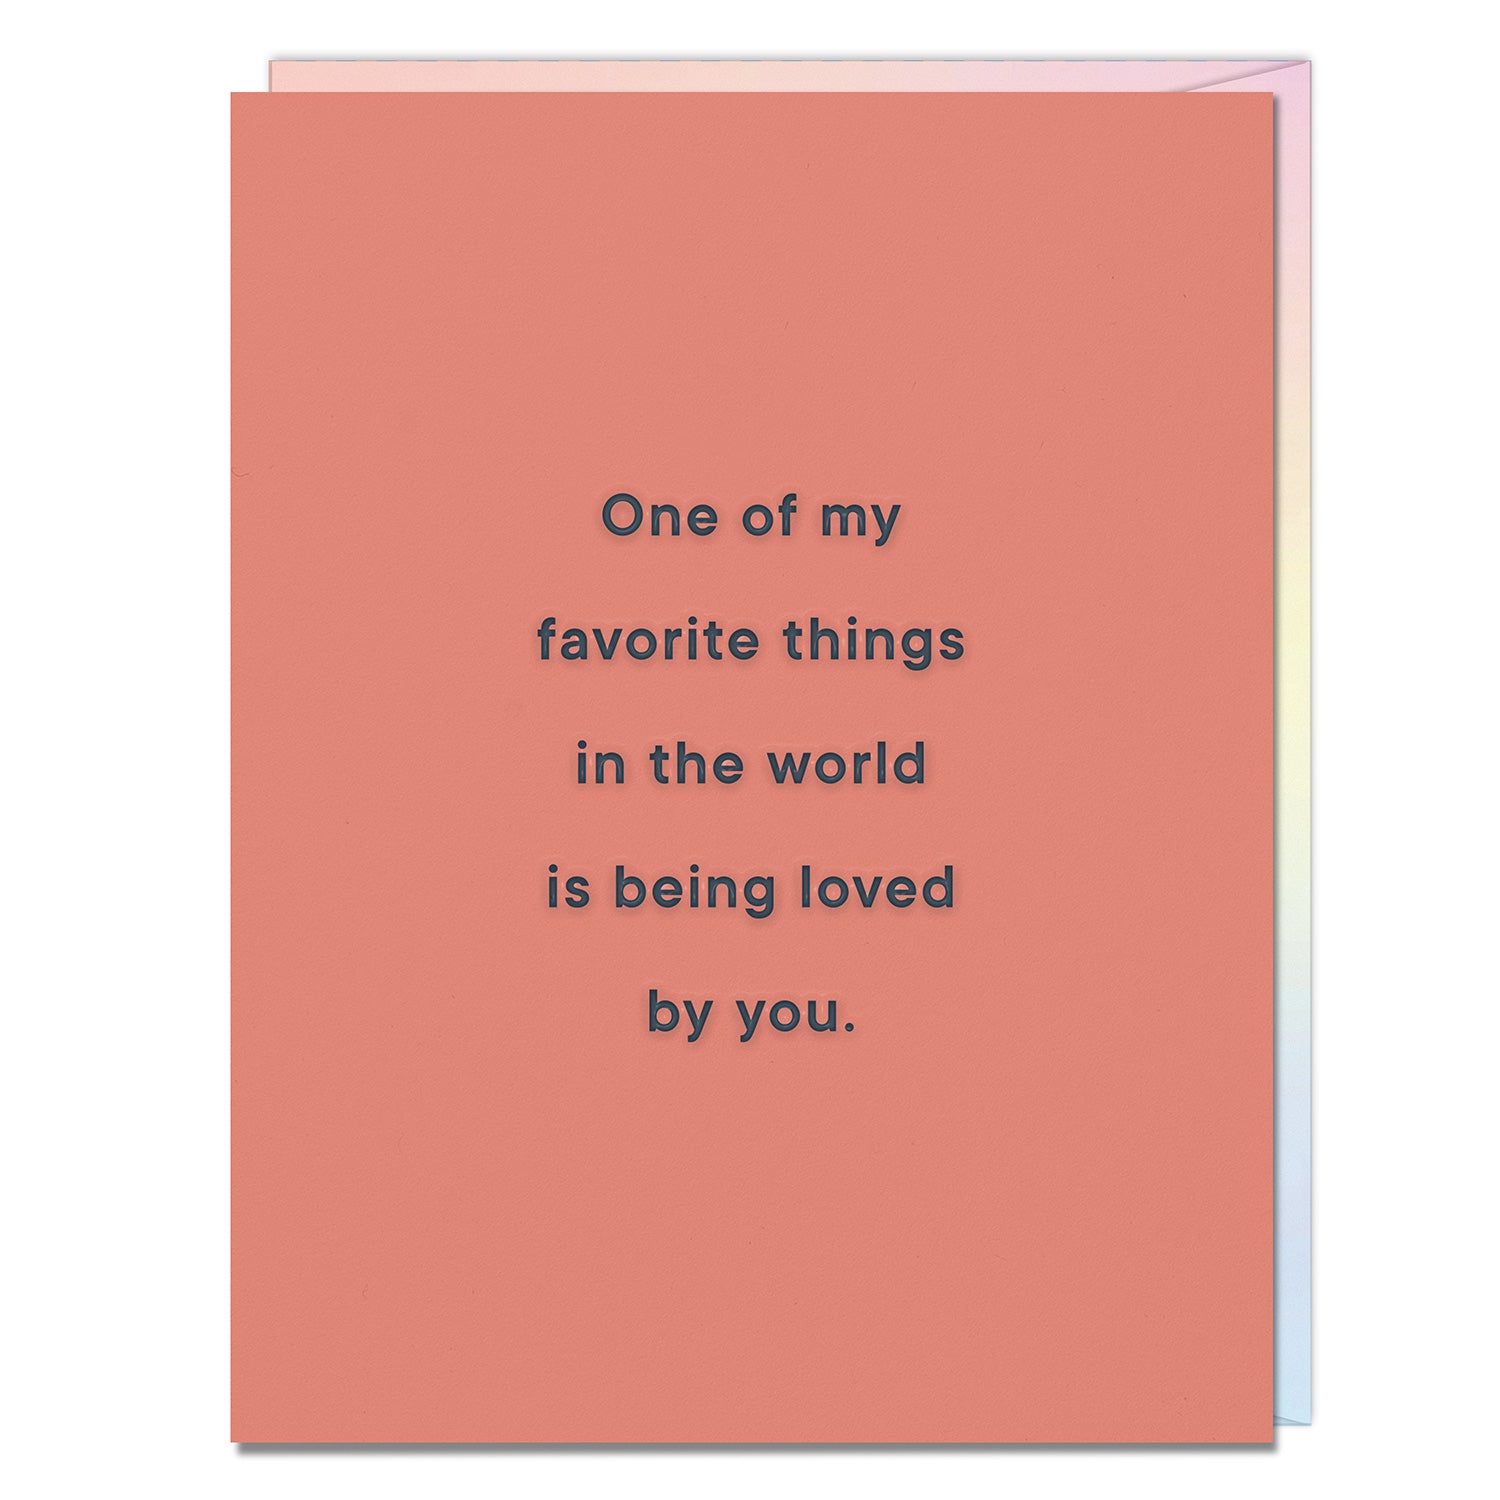 Favorite Things In The World Loved By You Card